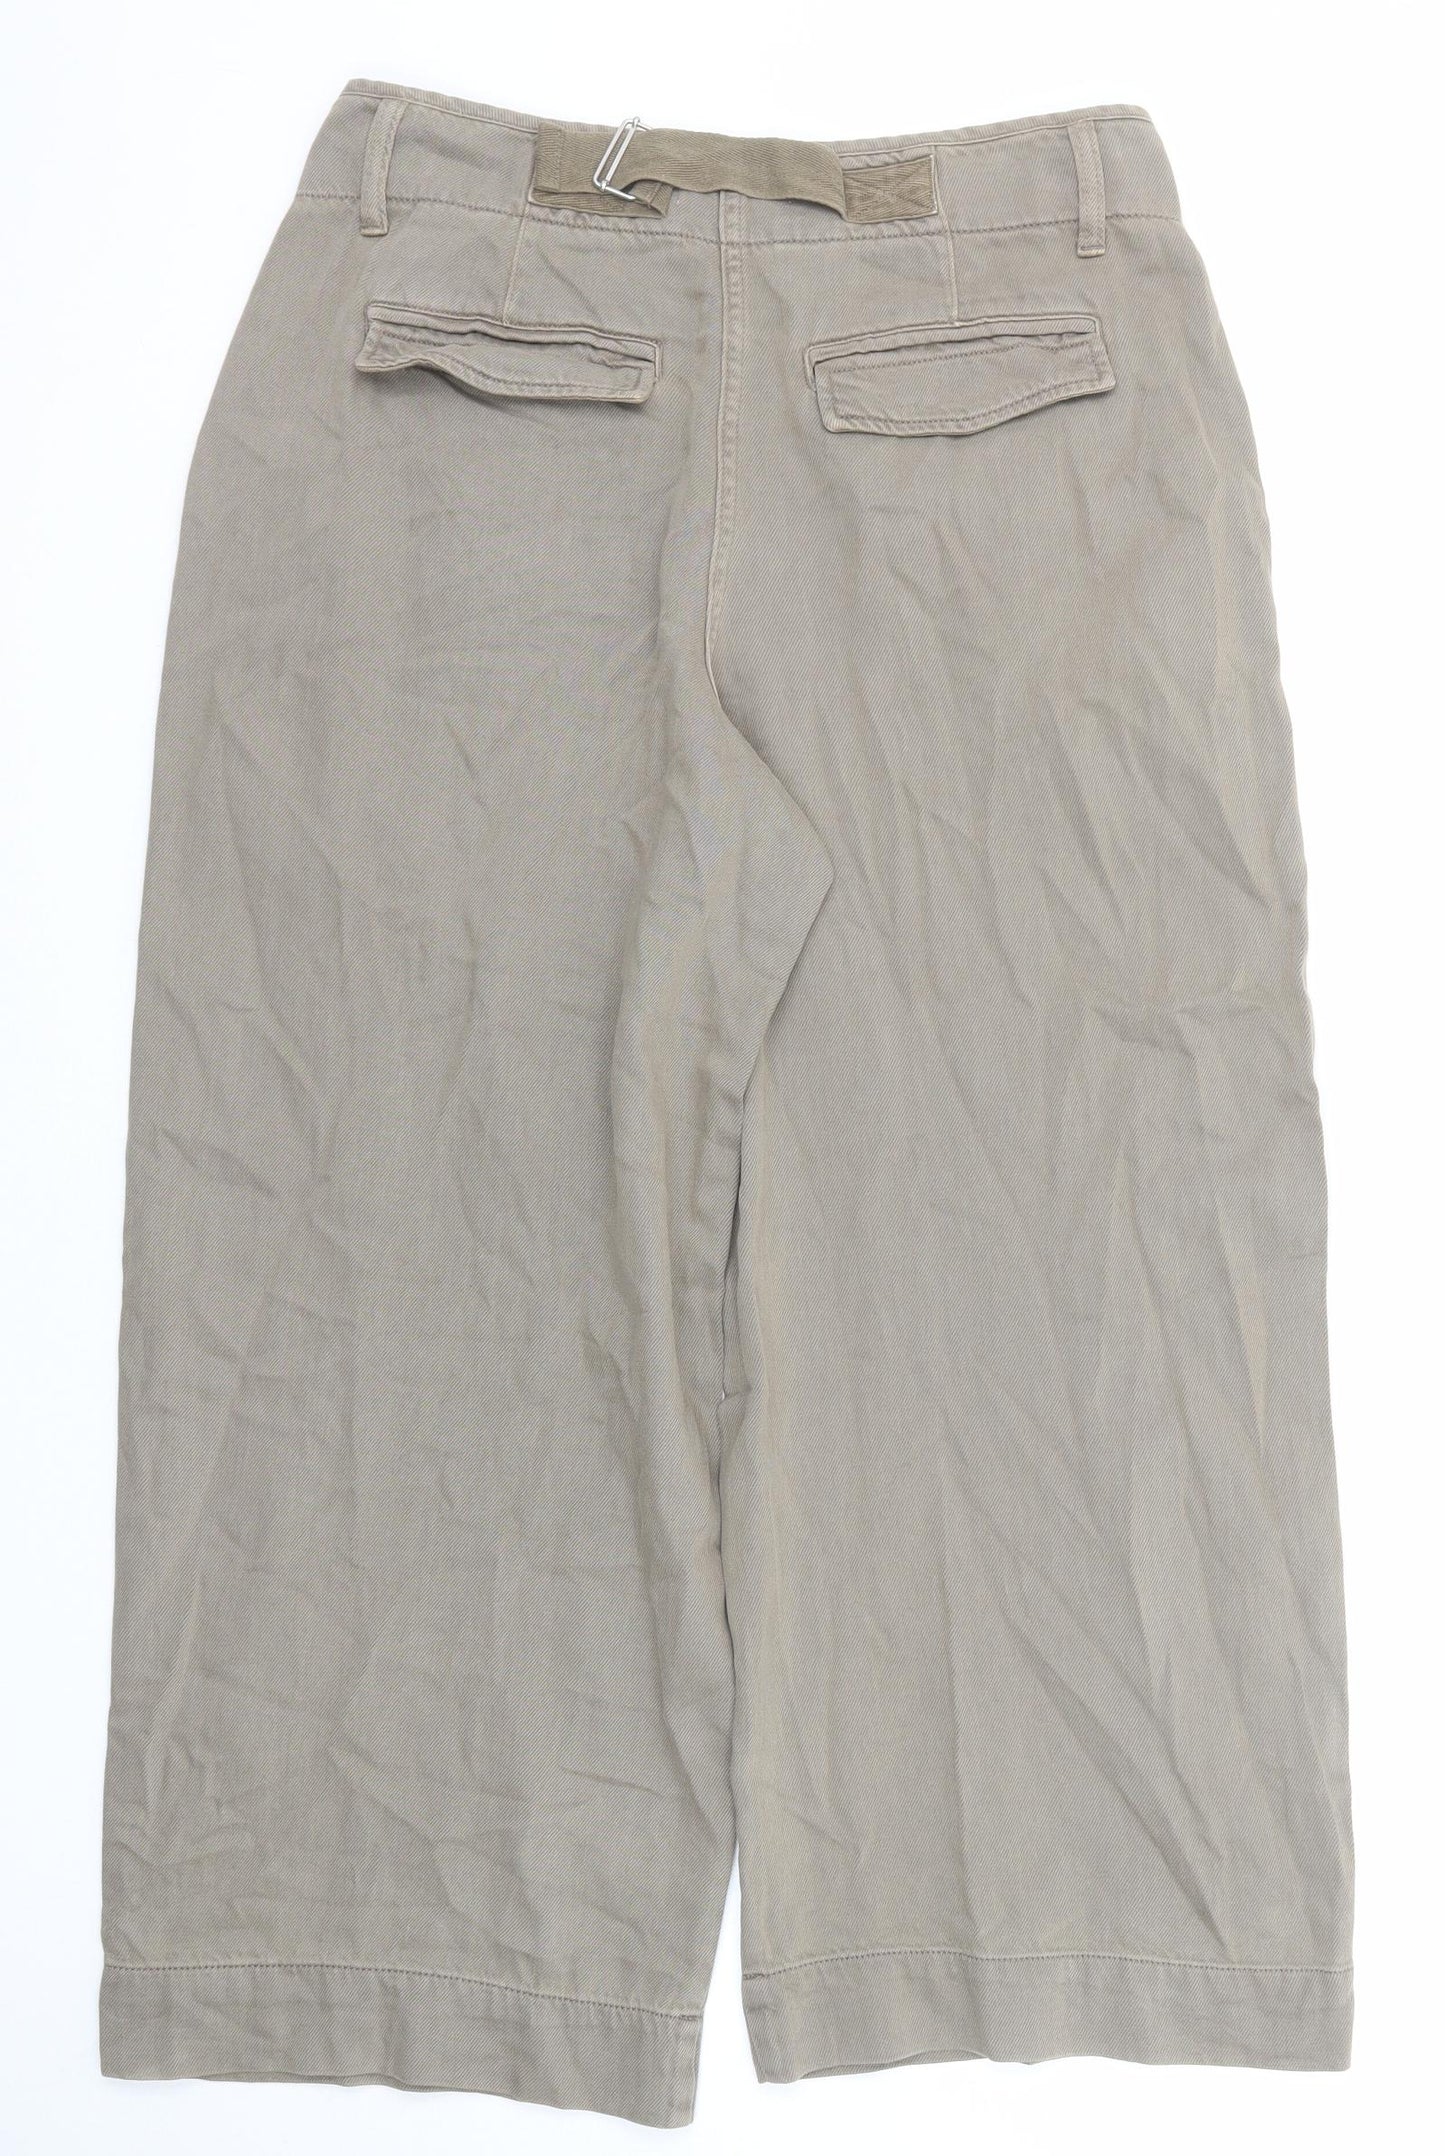 Marks and Spencer Womens Beige Cotton Trousers Size 14 Regular Zip